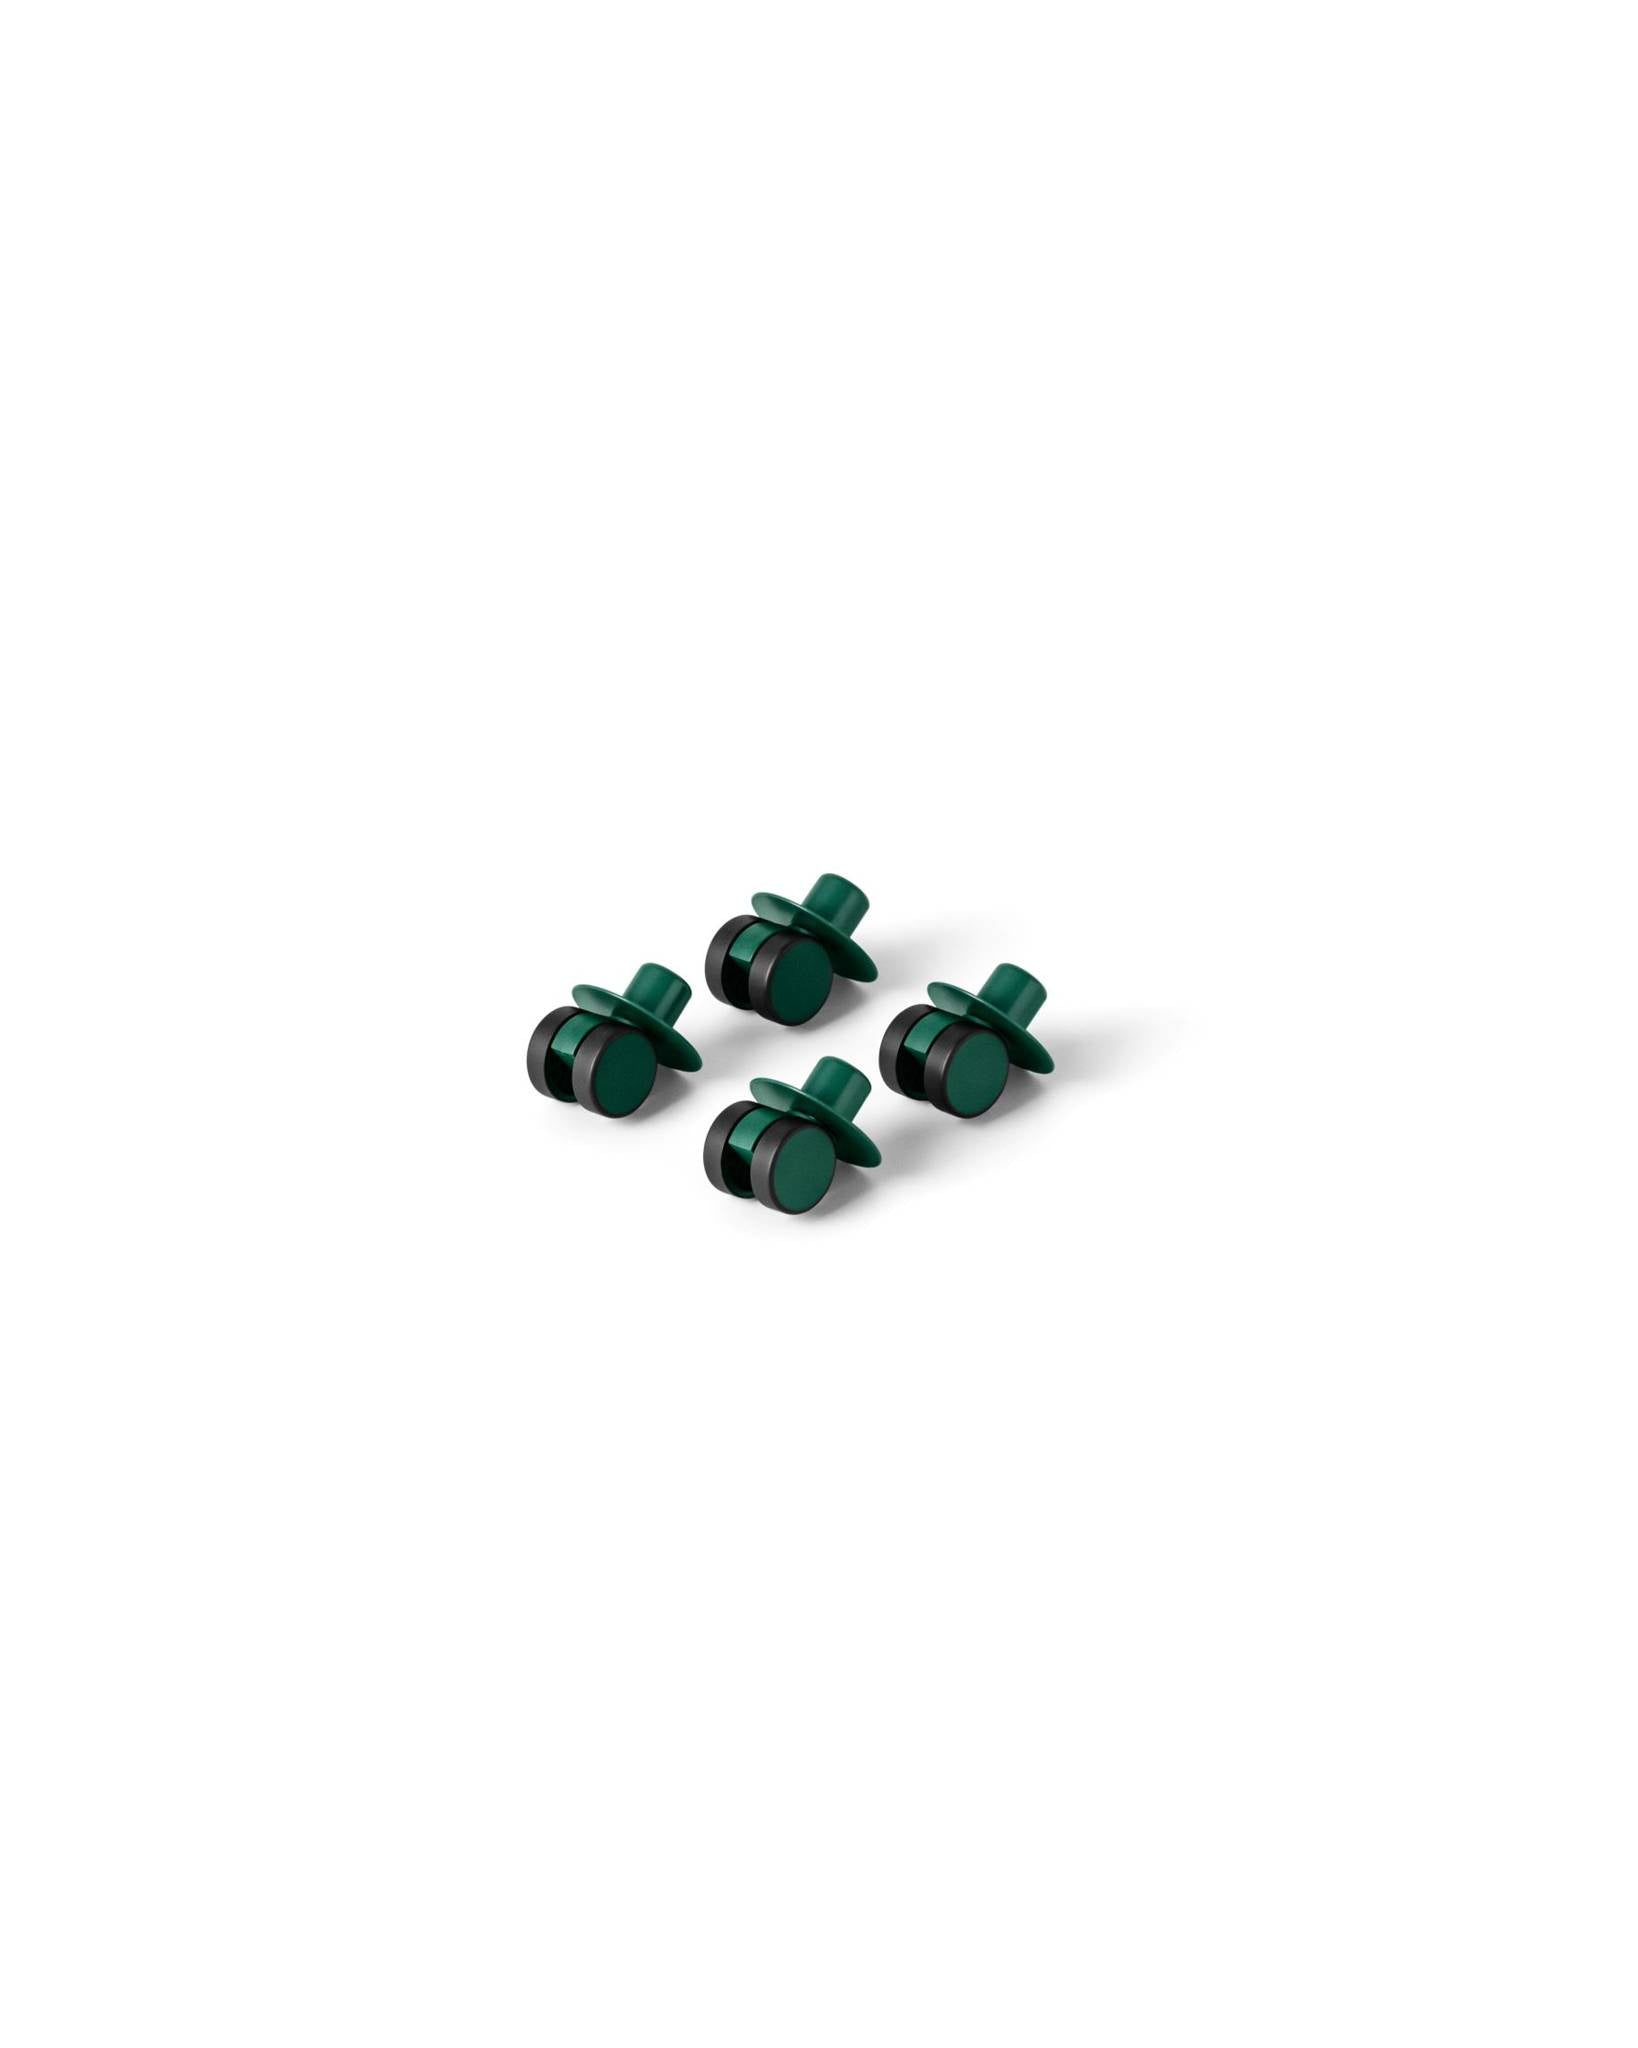 Module - four rotary wheels, green/Forest Green